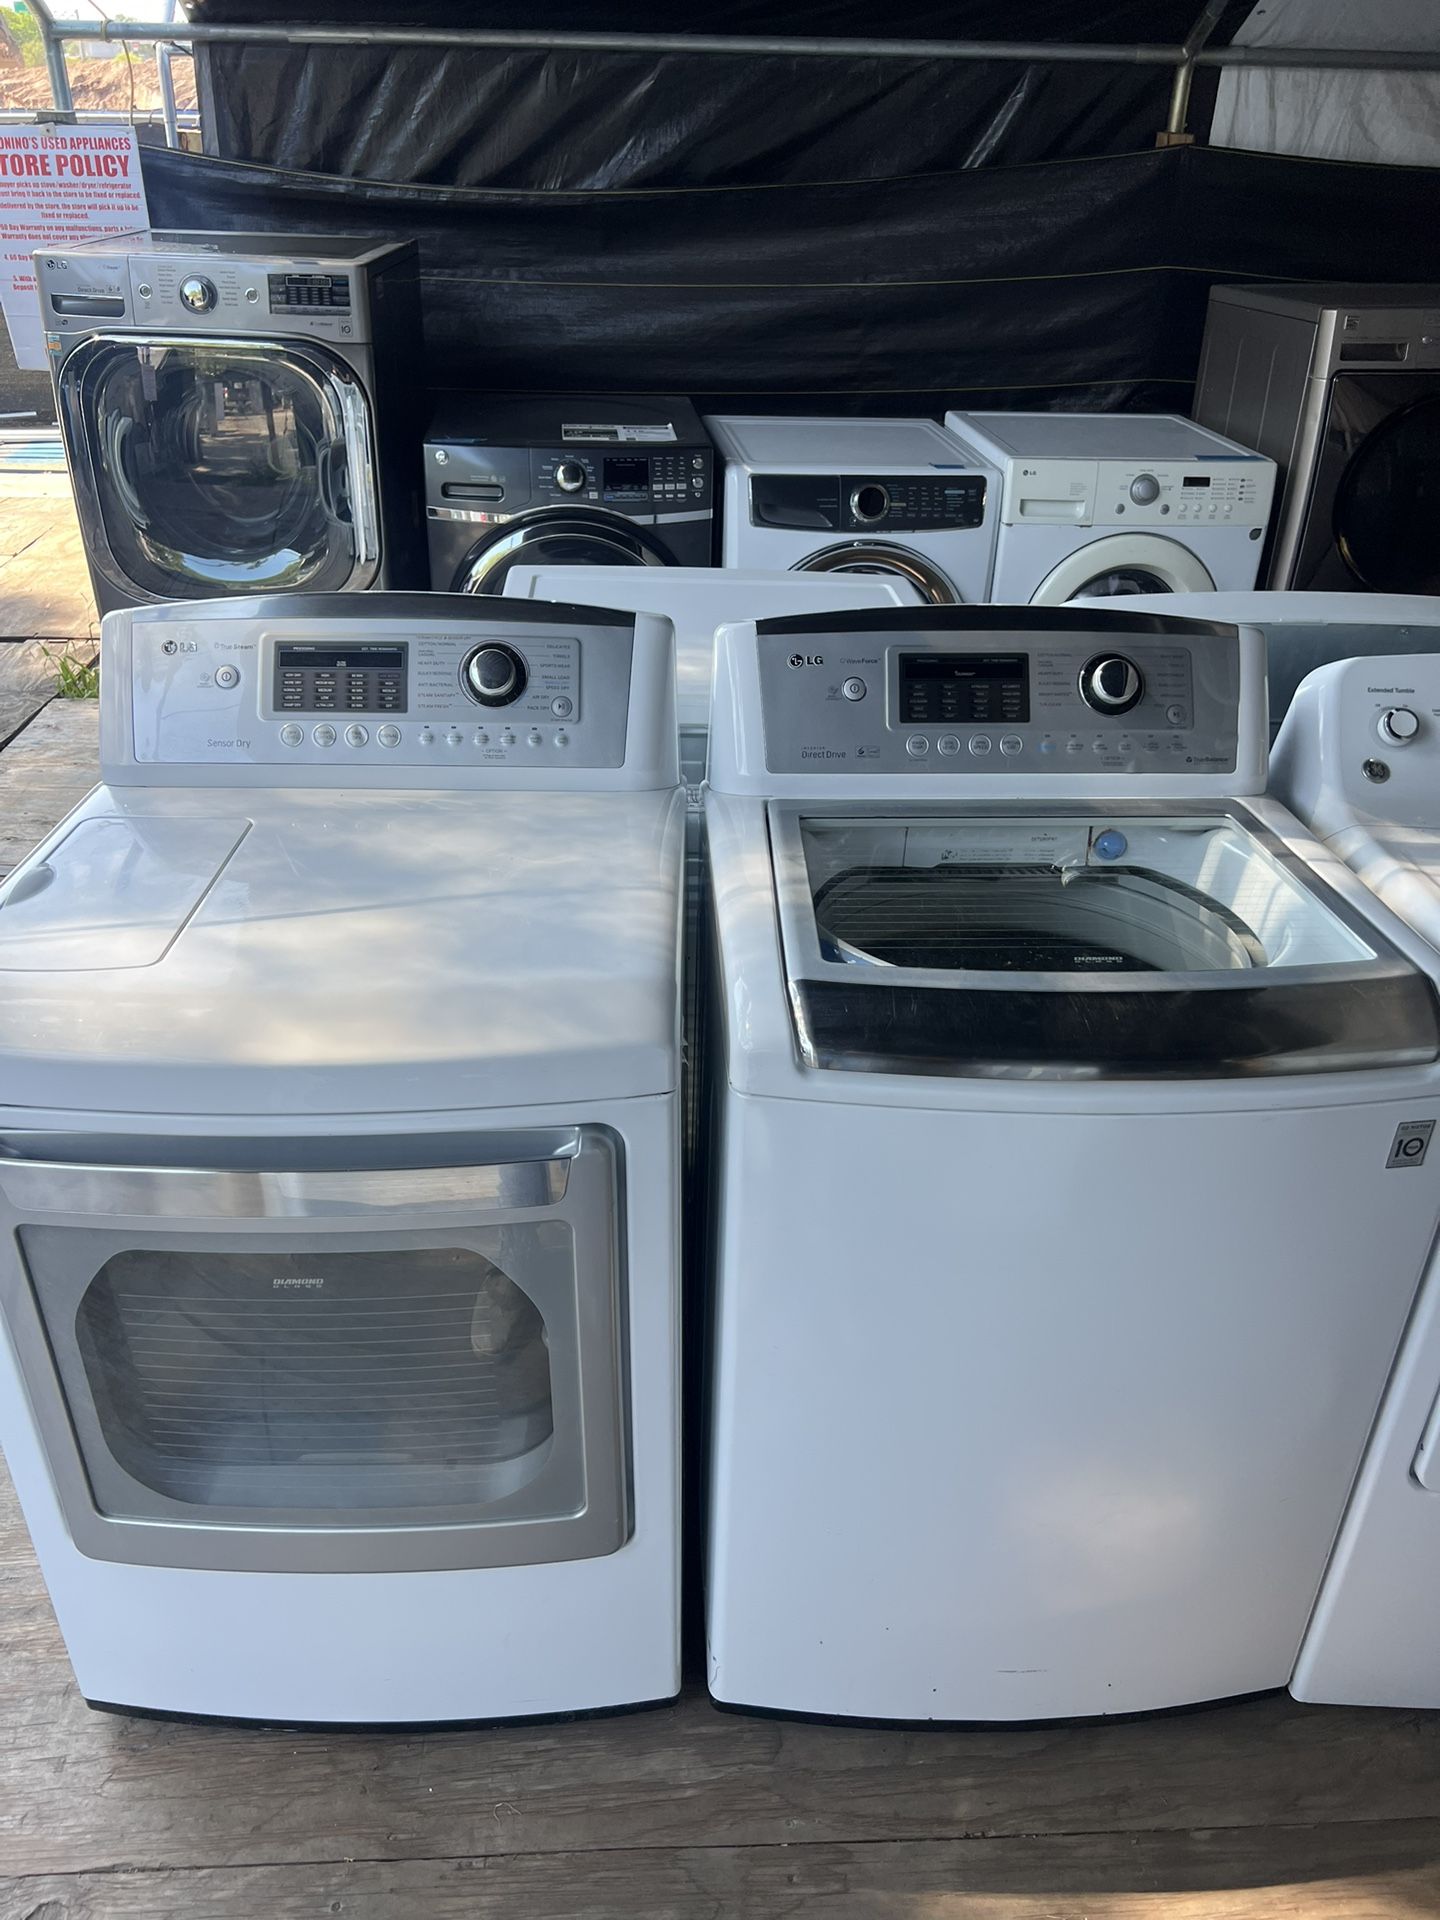 Lg Washer&dryer Large Capacity Set   60 day warranty/ Located at:📍5415 Carmack Rd Tampa Fl 33610📍 